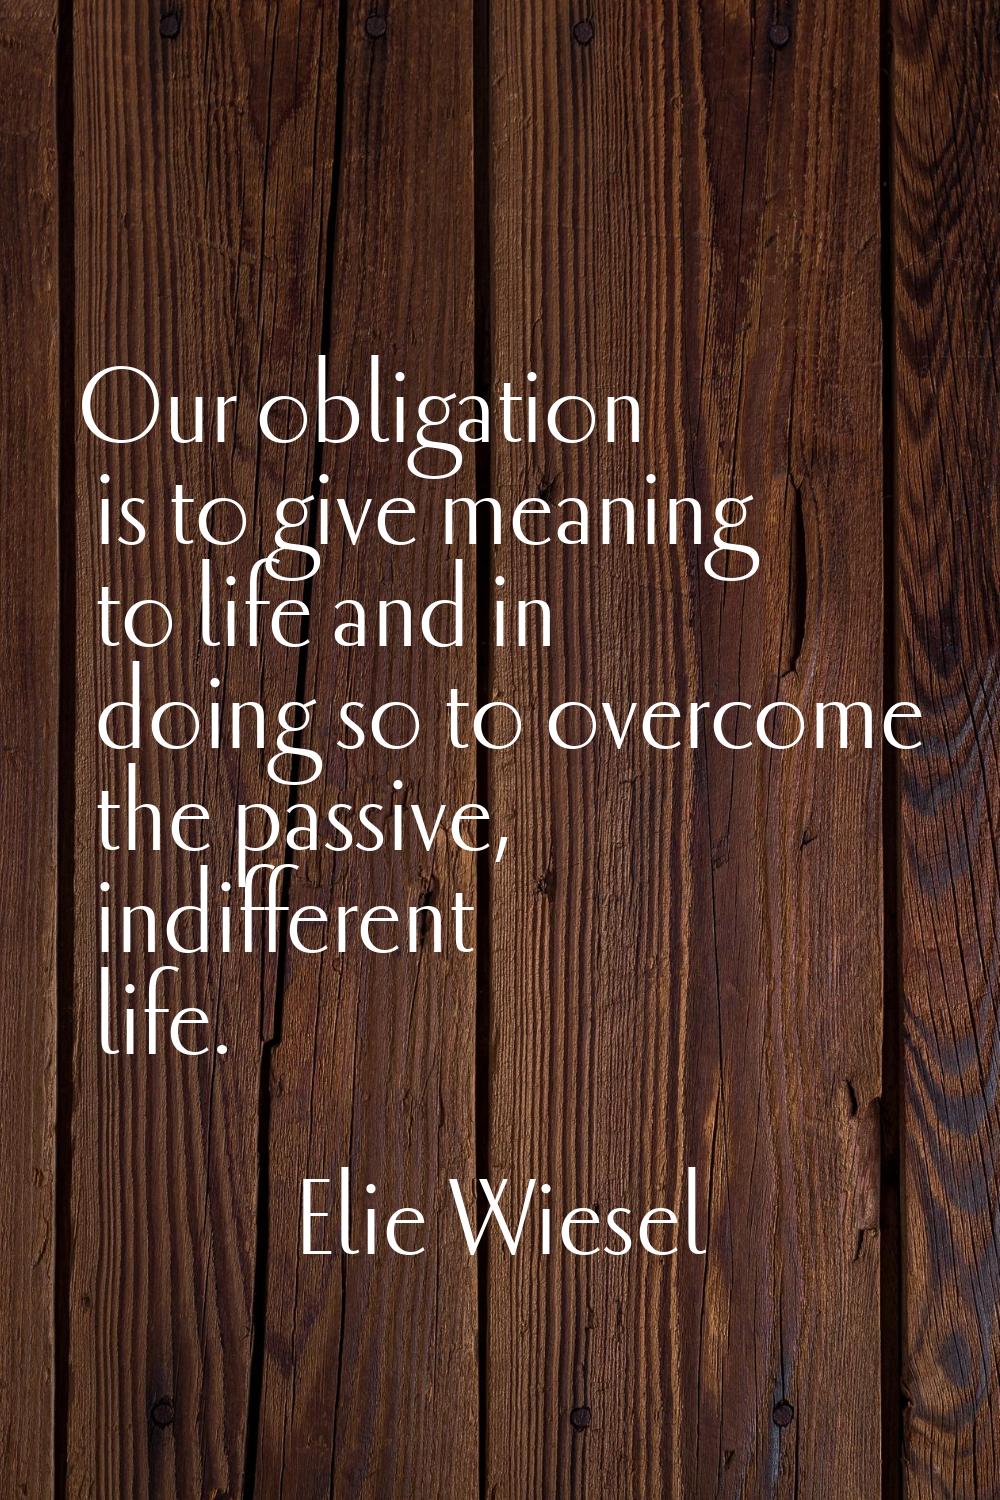 Our obligation is to give meaning to life and in doing so to overcome the passive, indifferent life